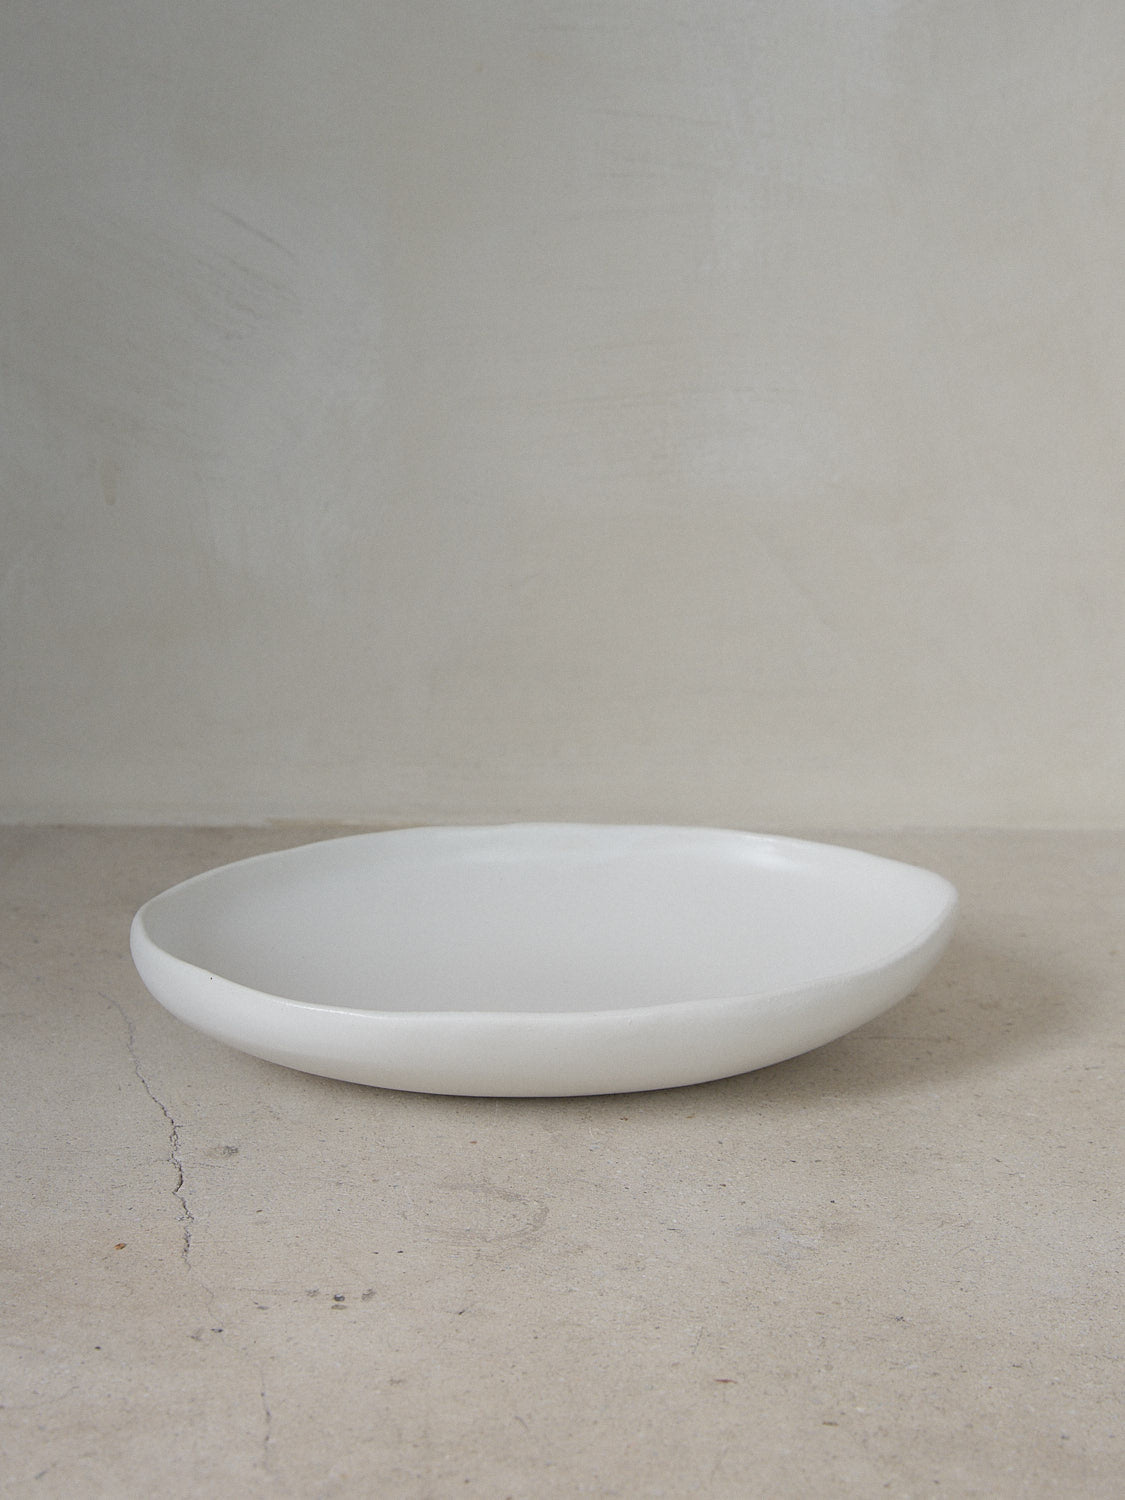 Raw Oval Bowl in Ecru. Large, oblong handmade serving bowl perfect for entertaining and everyday use in classic matte white stoneware. 